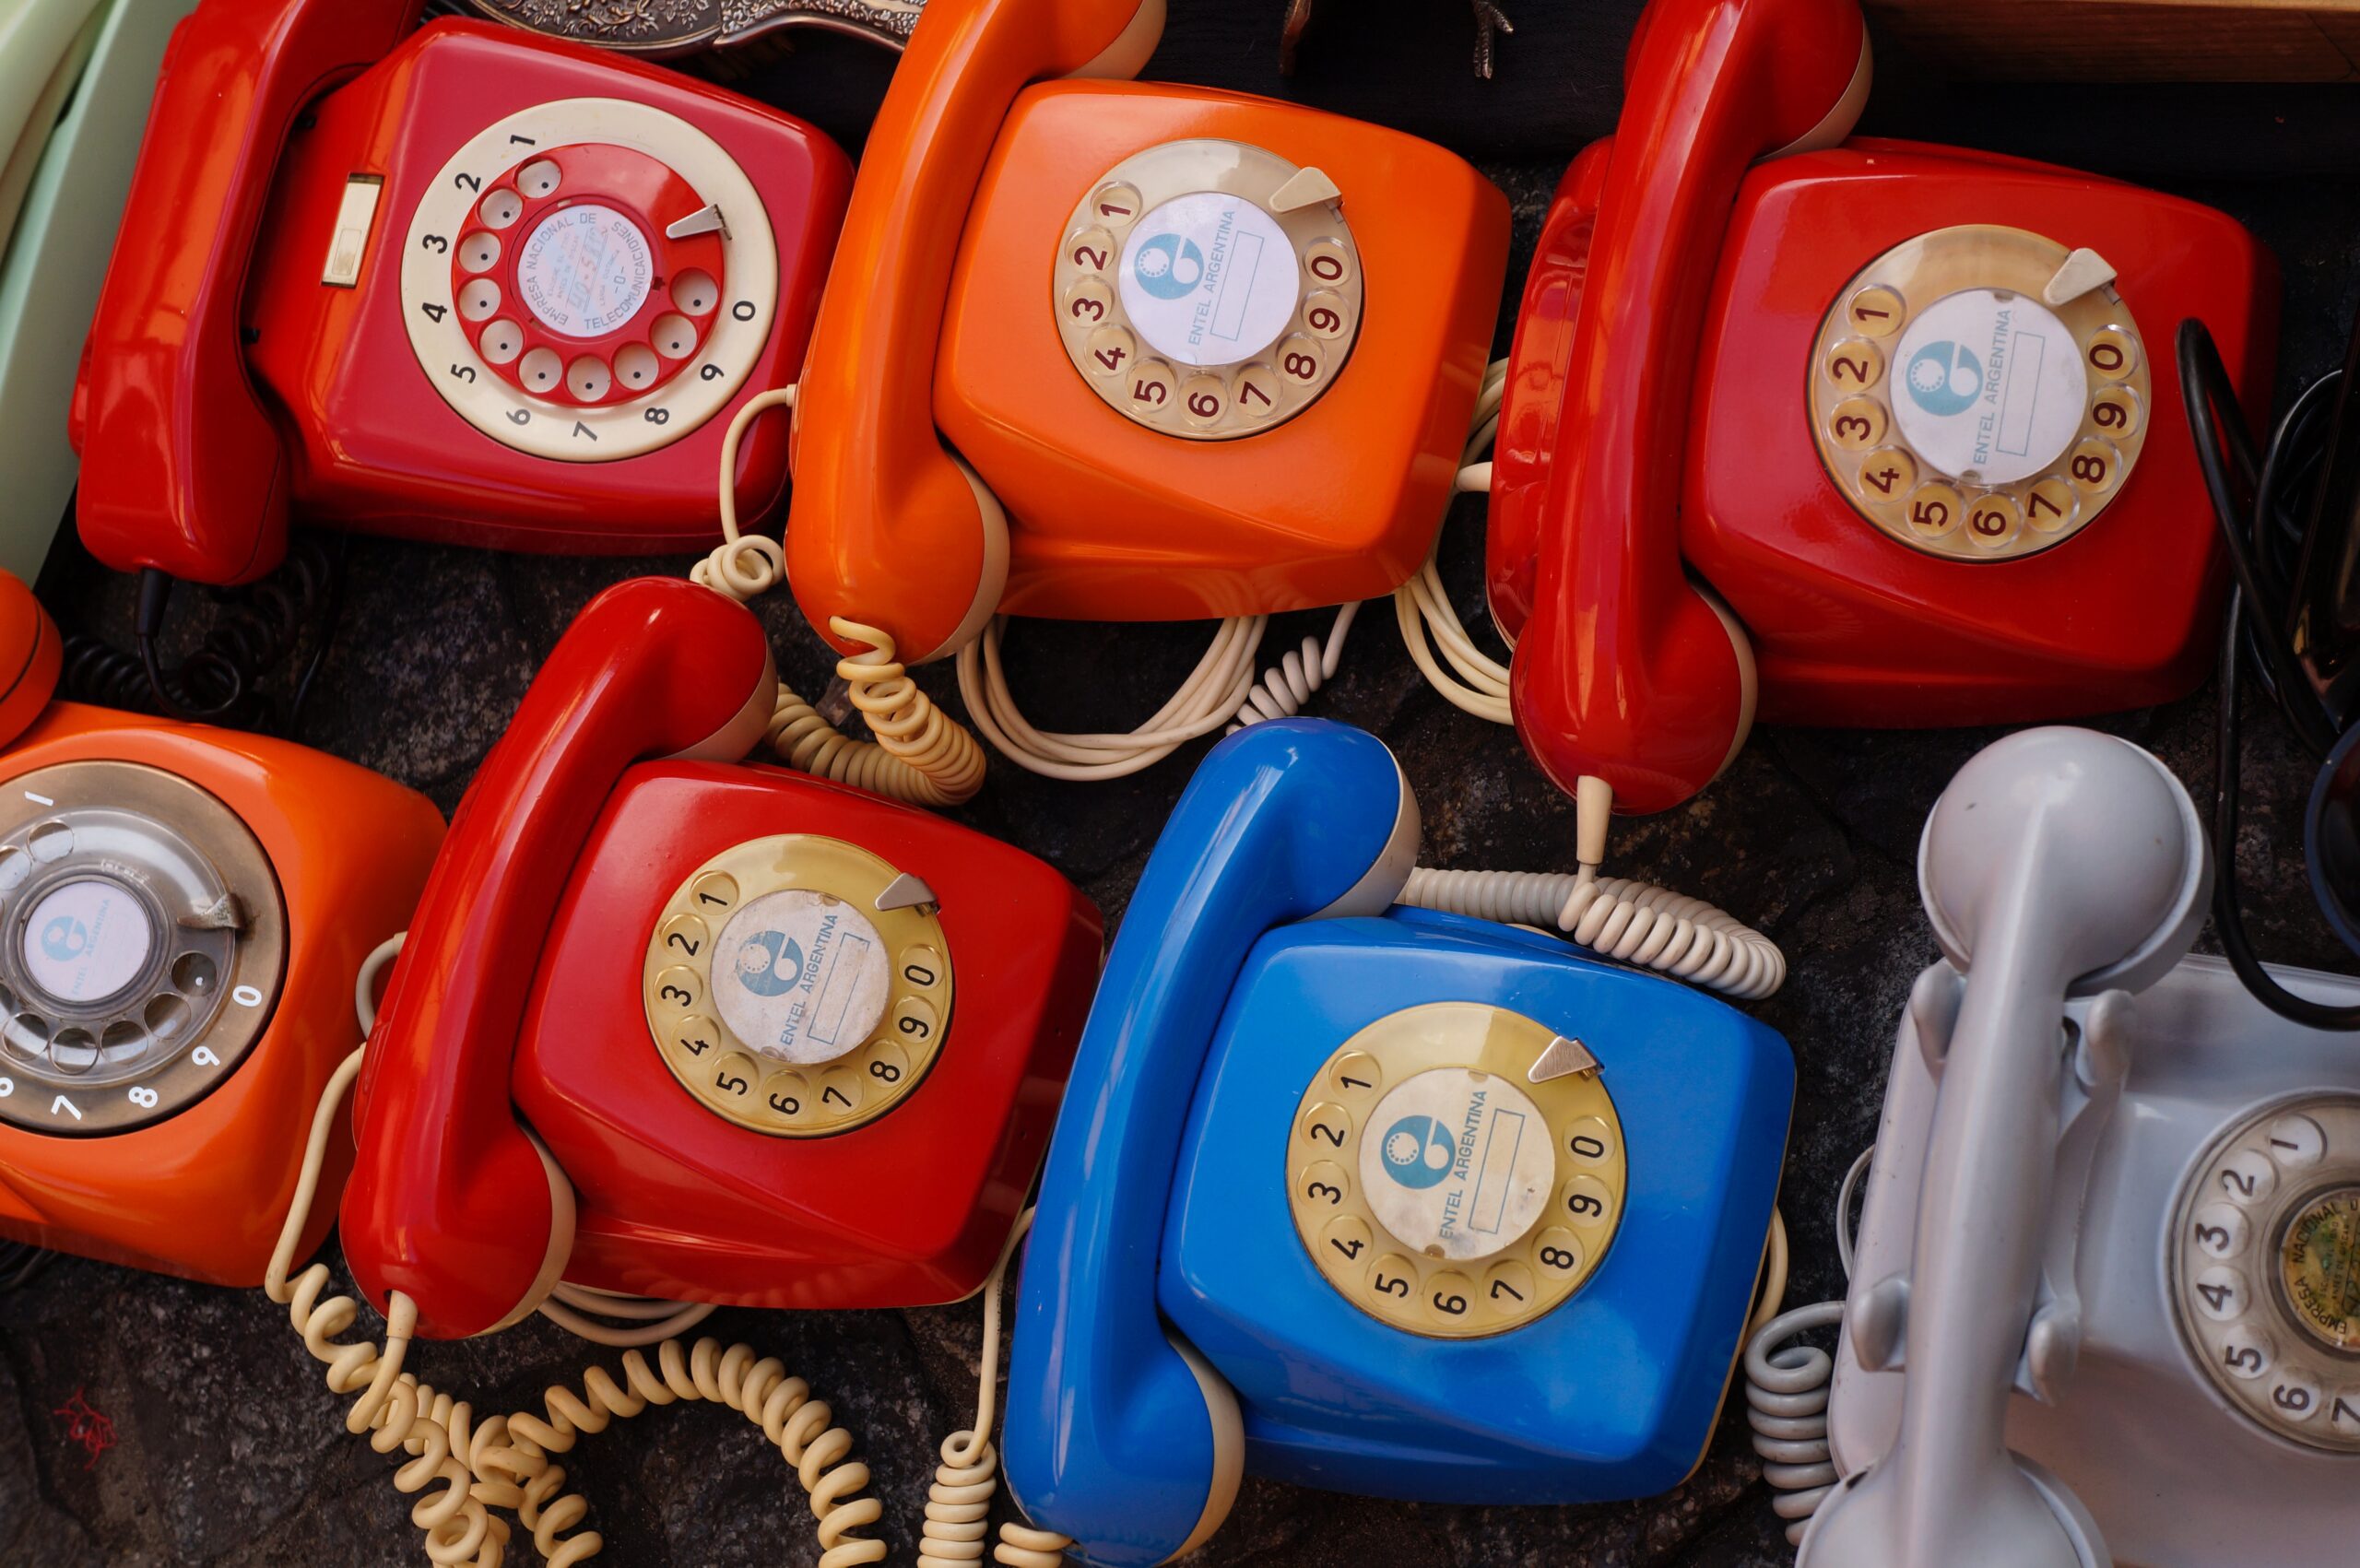 Telephone Consumer Protection Act (TCPA) Violations